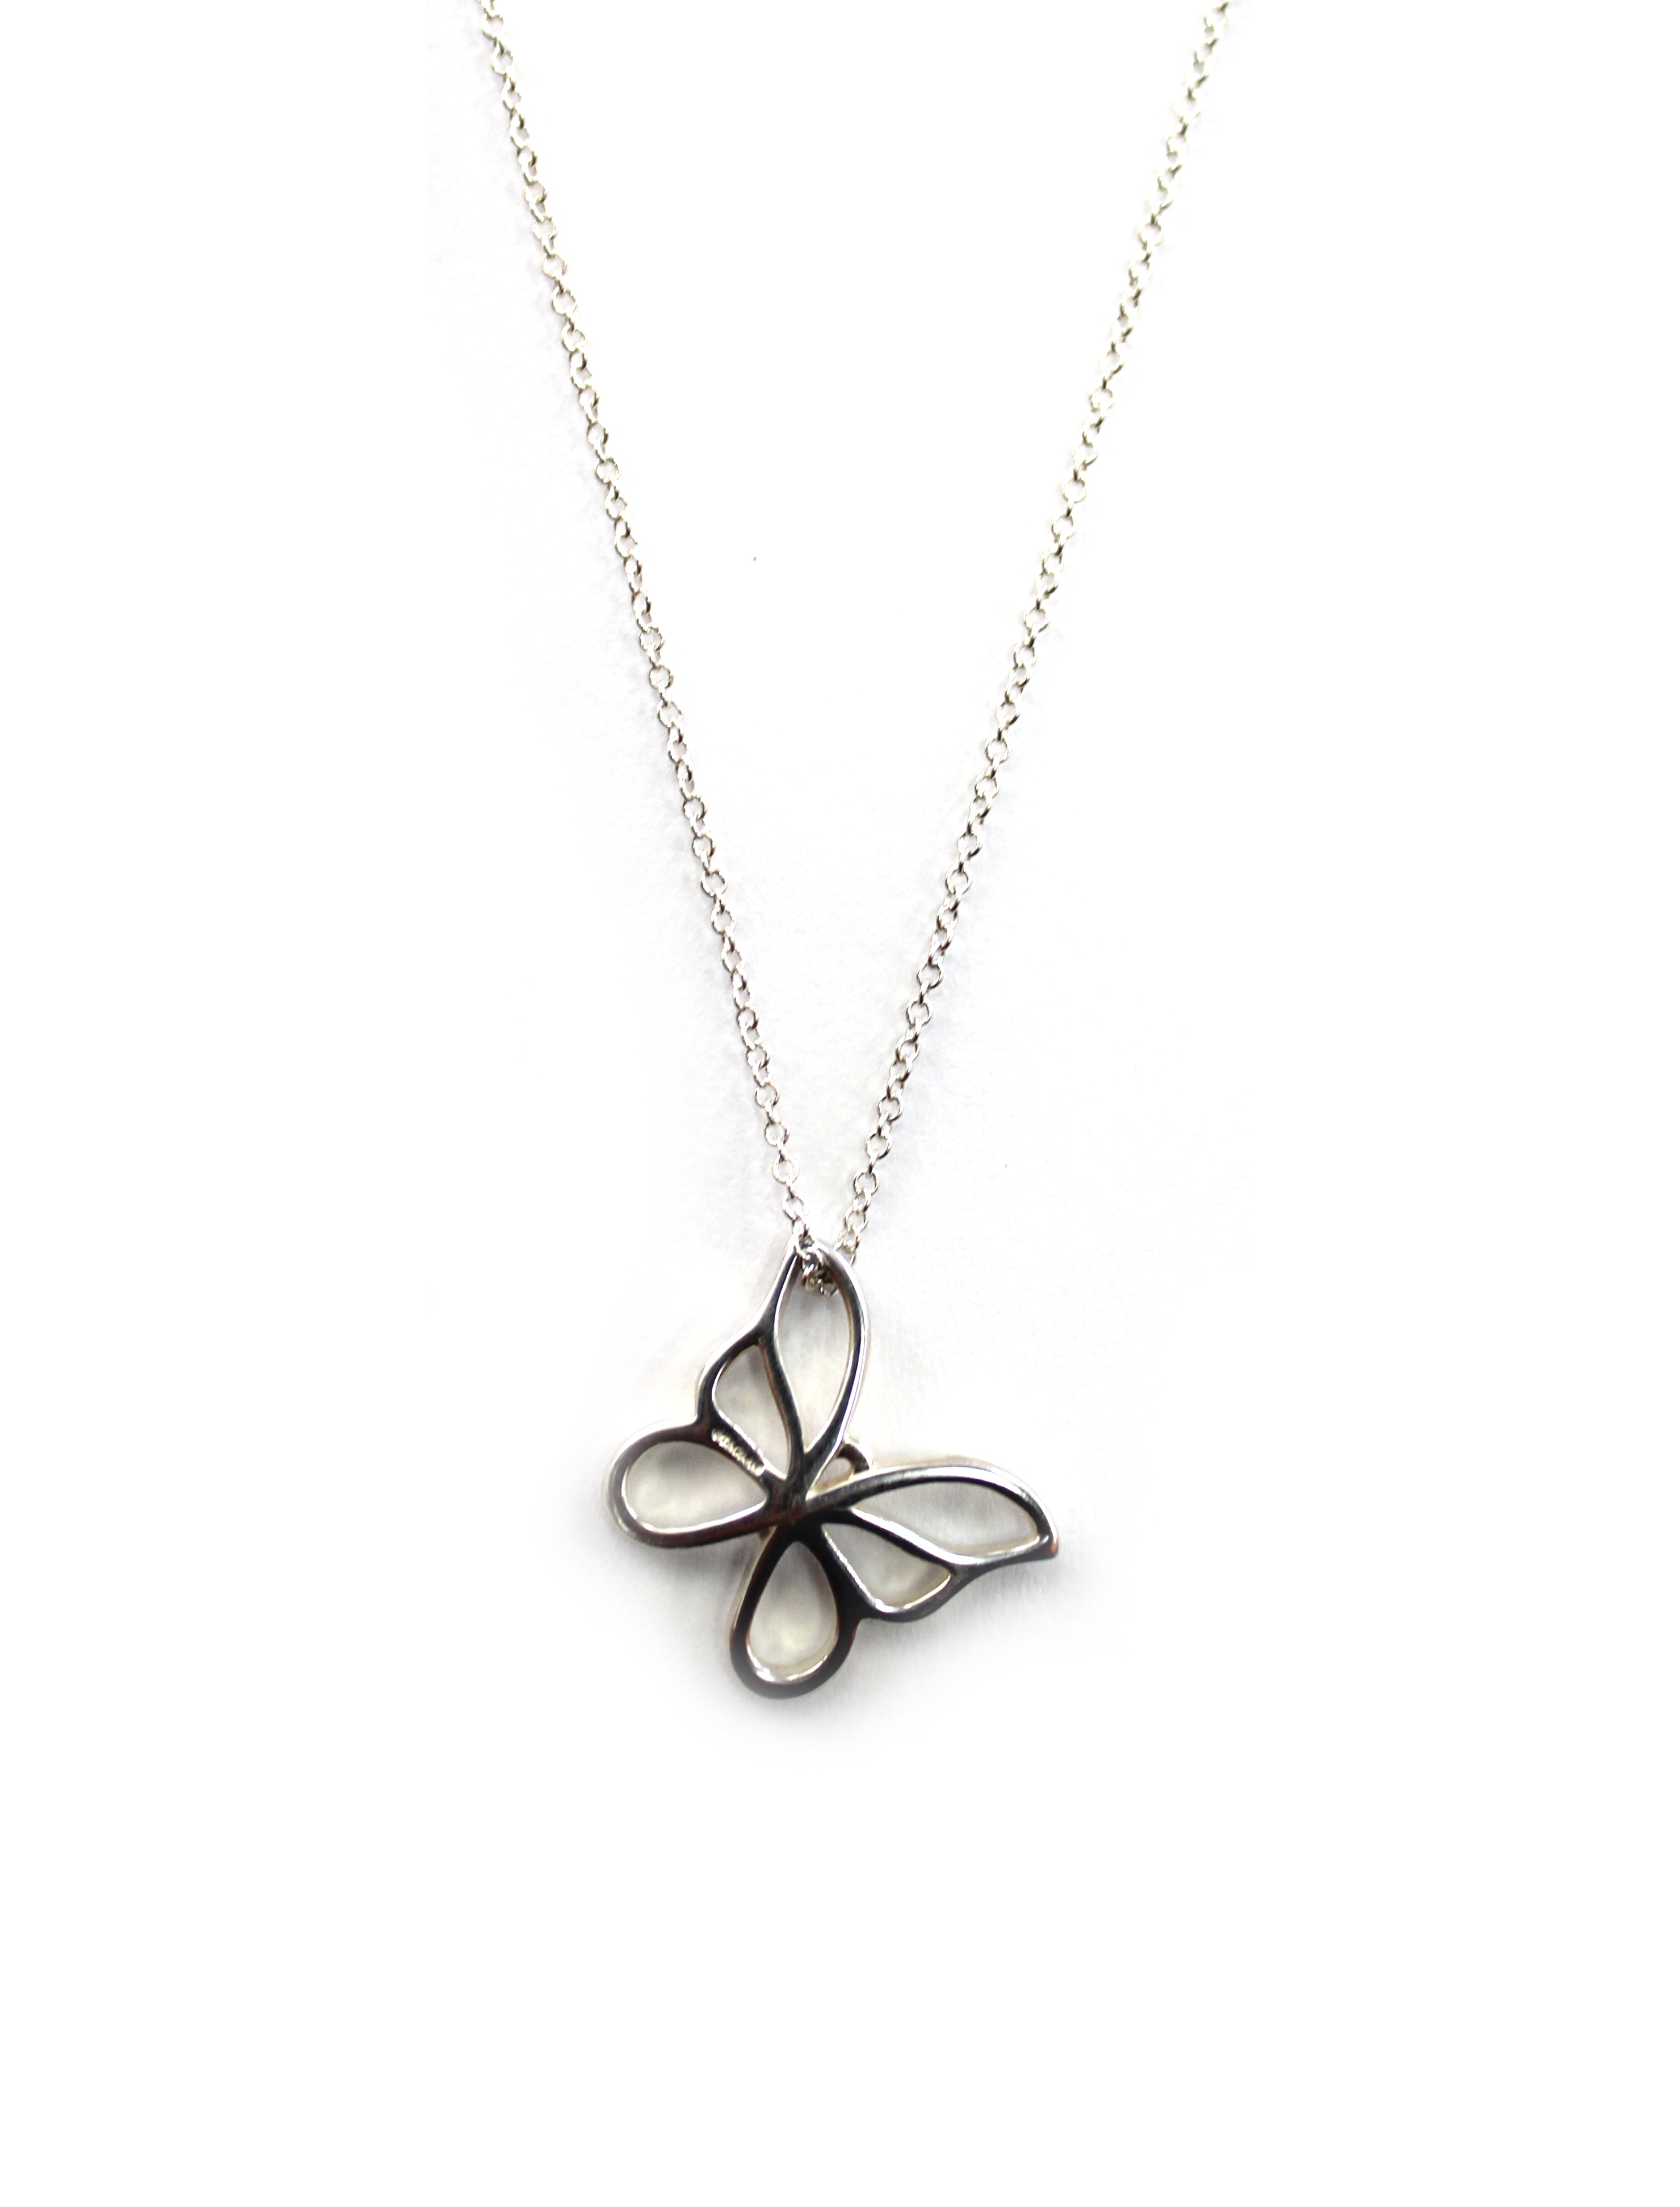 KOMEHYO|TIFFANY BUTTERFLY NECKLACE|TIFFANY|BRAND JEWELRY|NECKLACES|OTHERS|[OFFICIAL]  KOMEHYO, ONE OF JAPAN'S LARGEST REUSE DEPARTMENT STORES